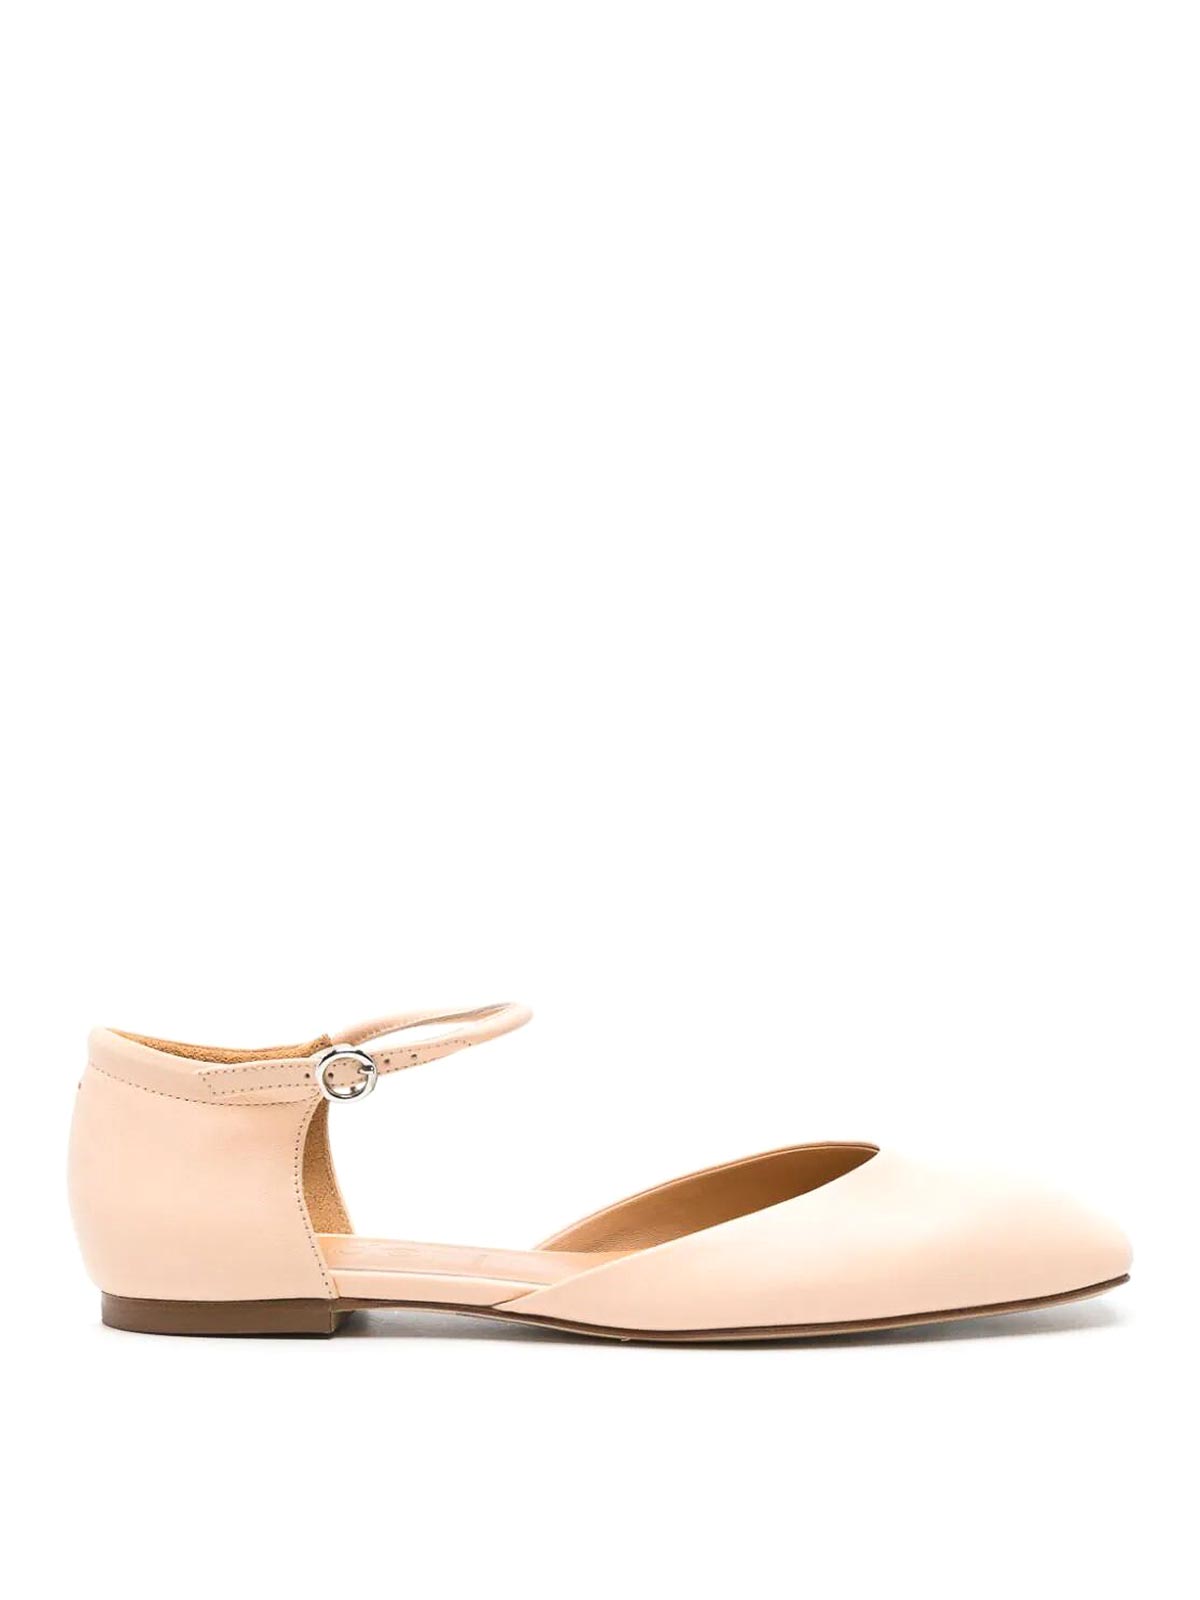 Shop Aeyde Miri Shoes In Nude & Neutrals